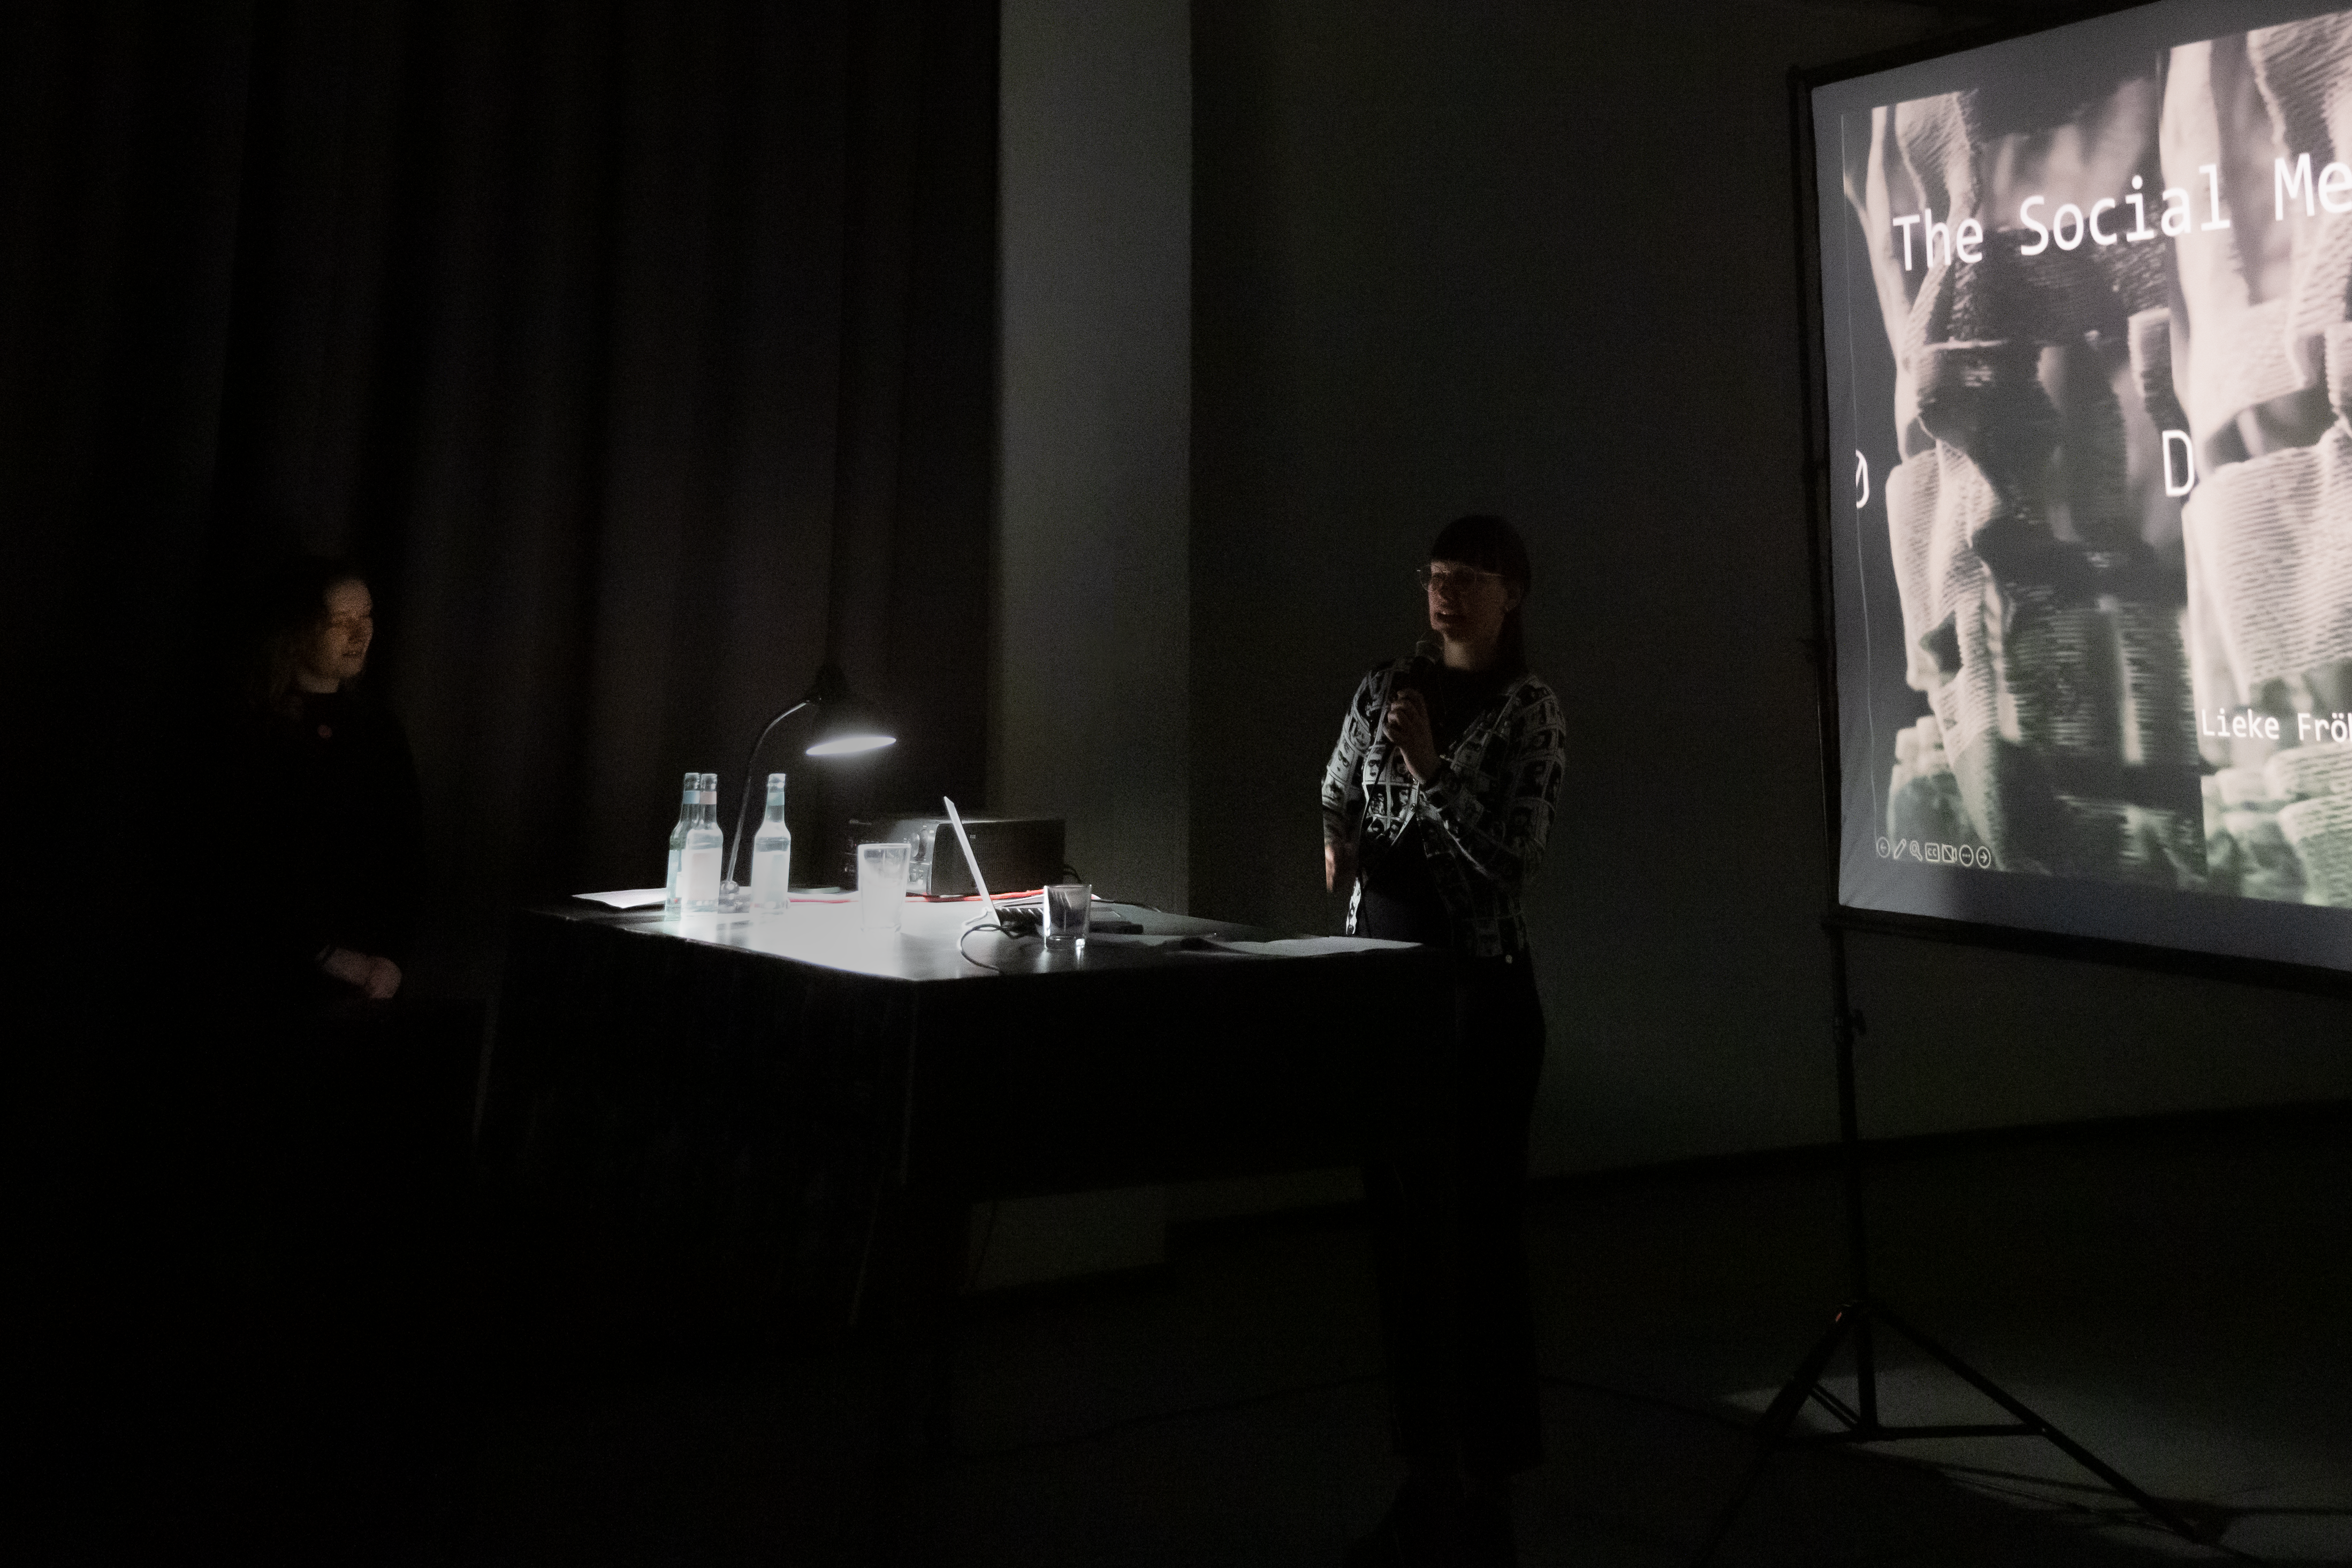 The speaker of a talk in front of the screen. The room is dark, only the table is lit by a spotlight lamp. A person standing on the left watching the speaker.